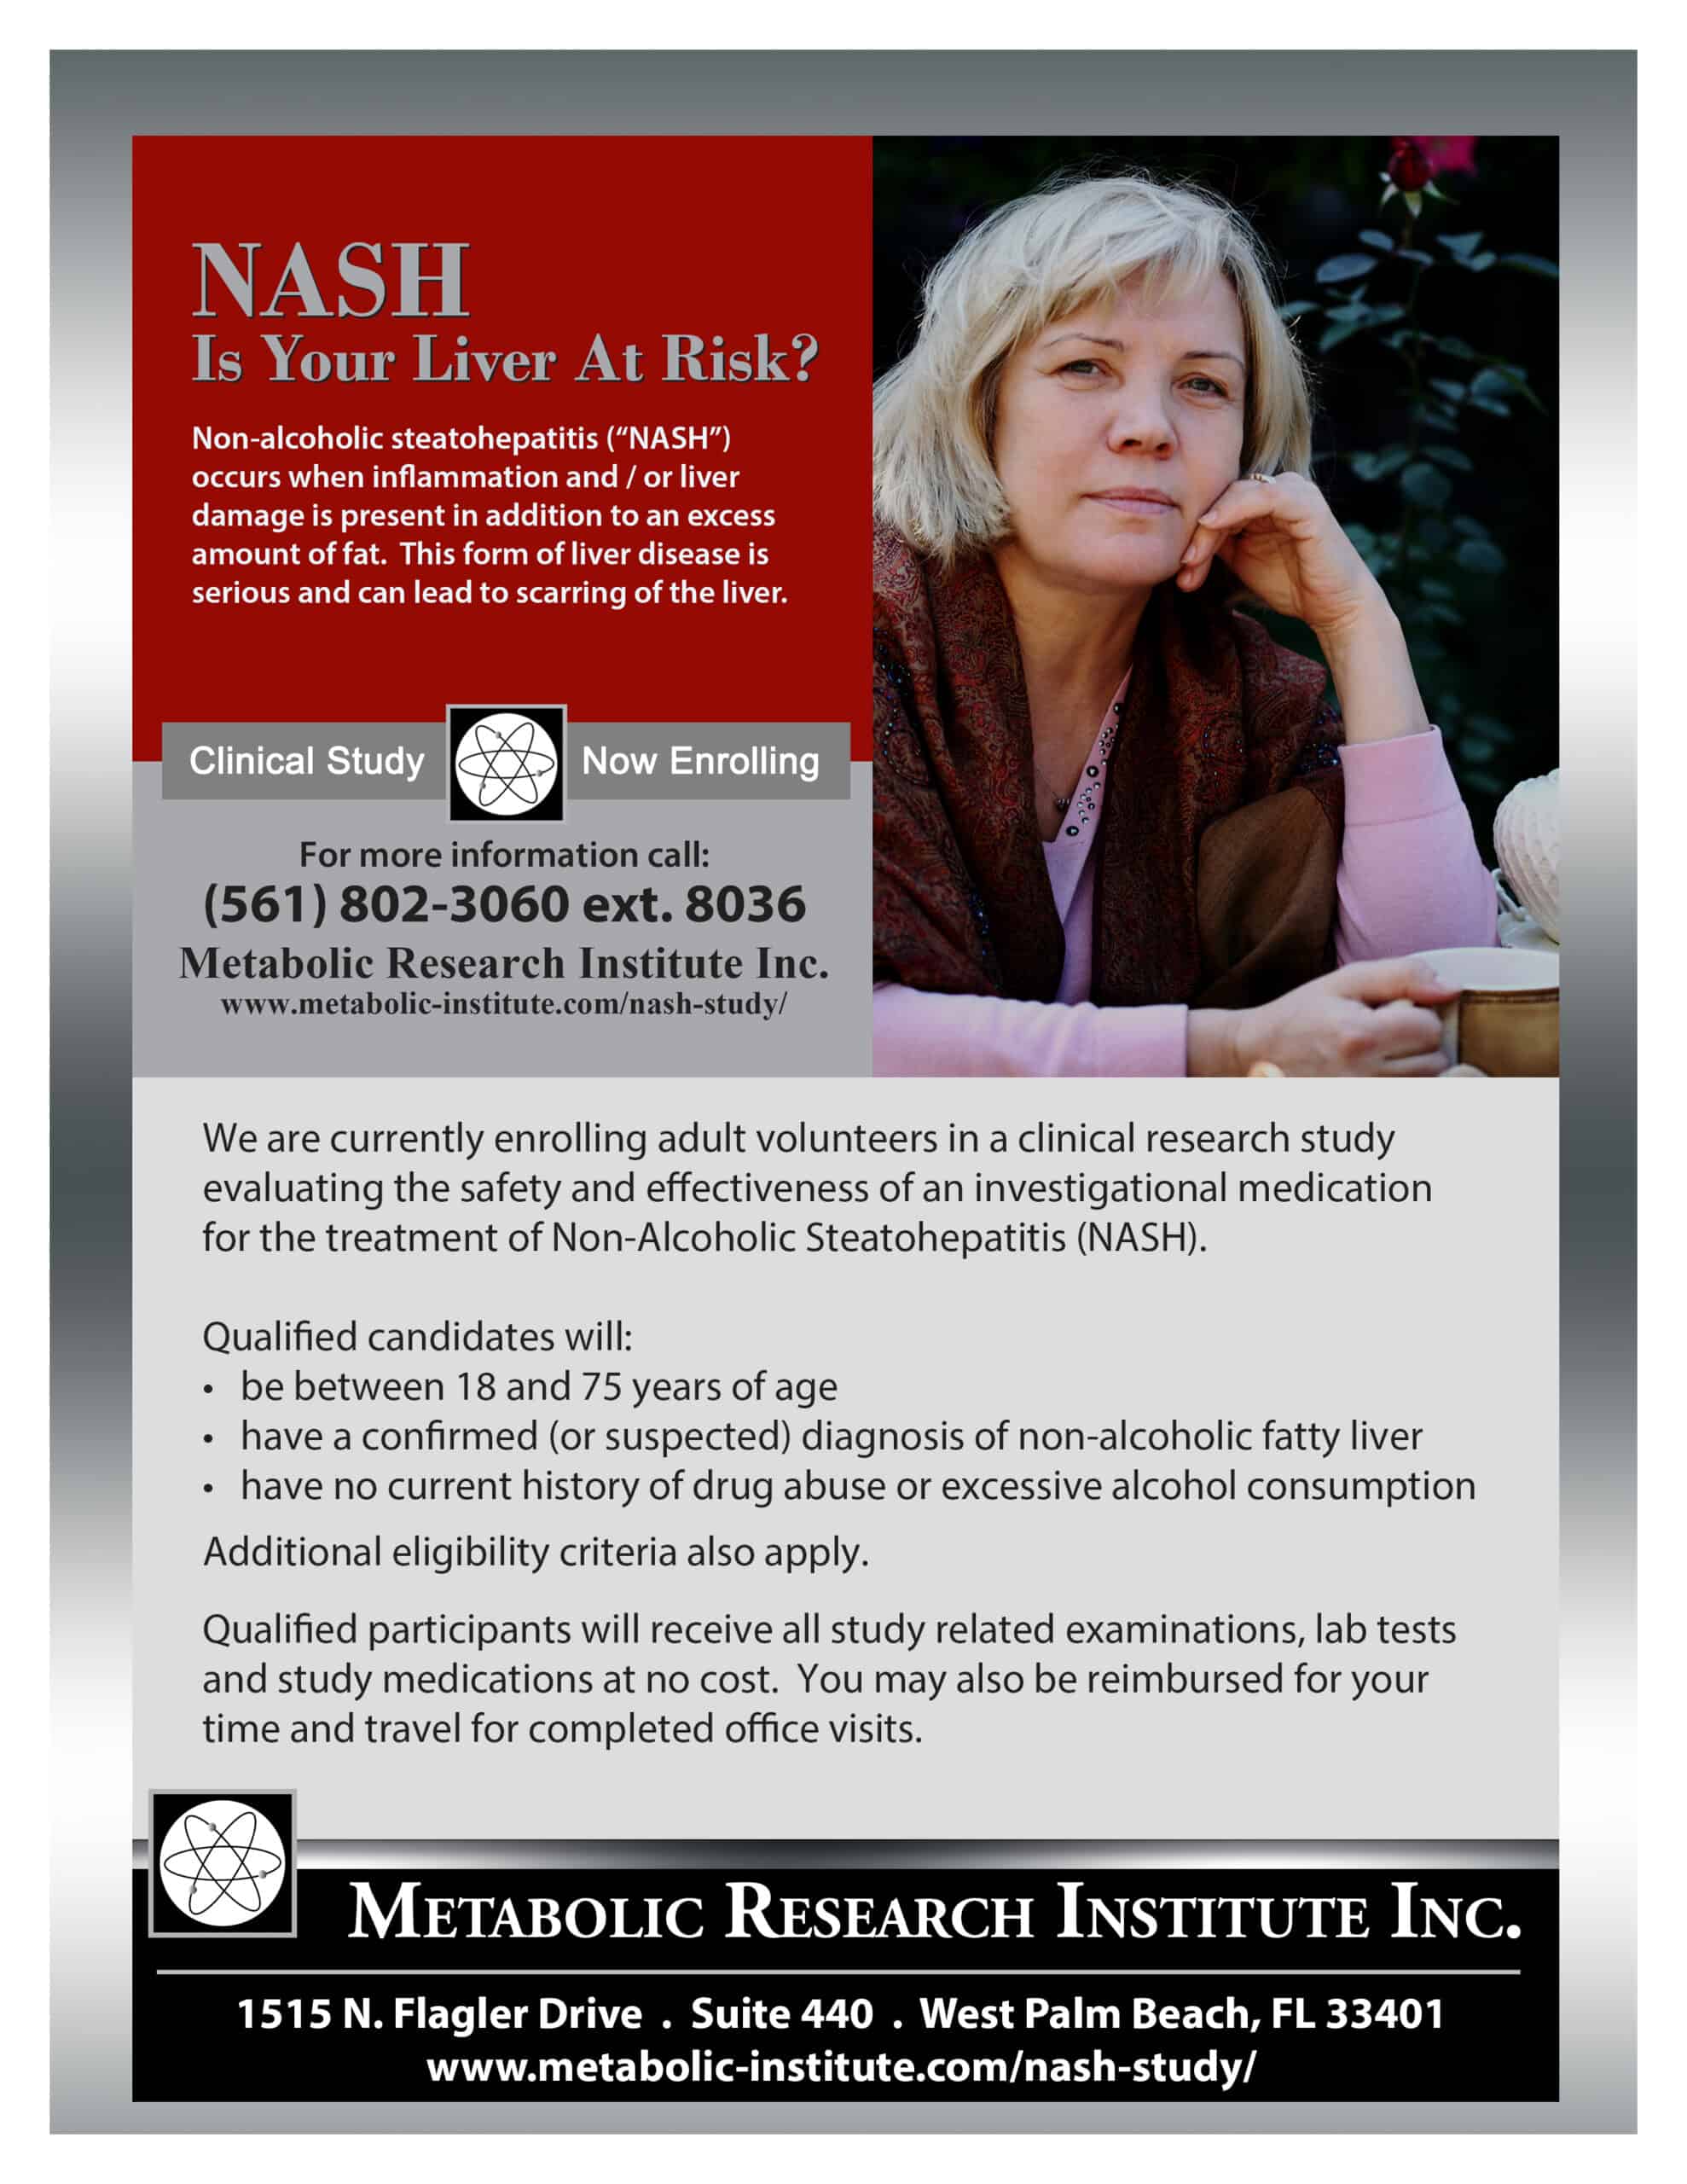 Clinical Research Study Flyer for NASH